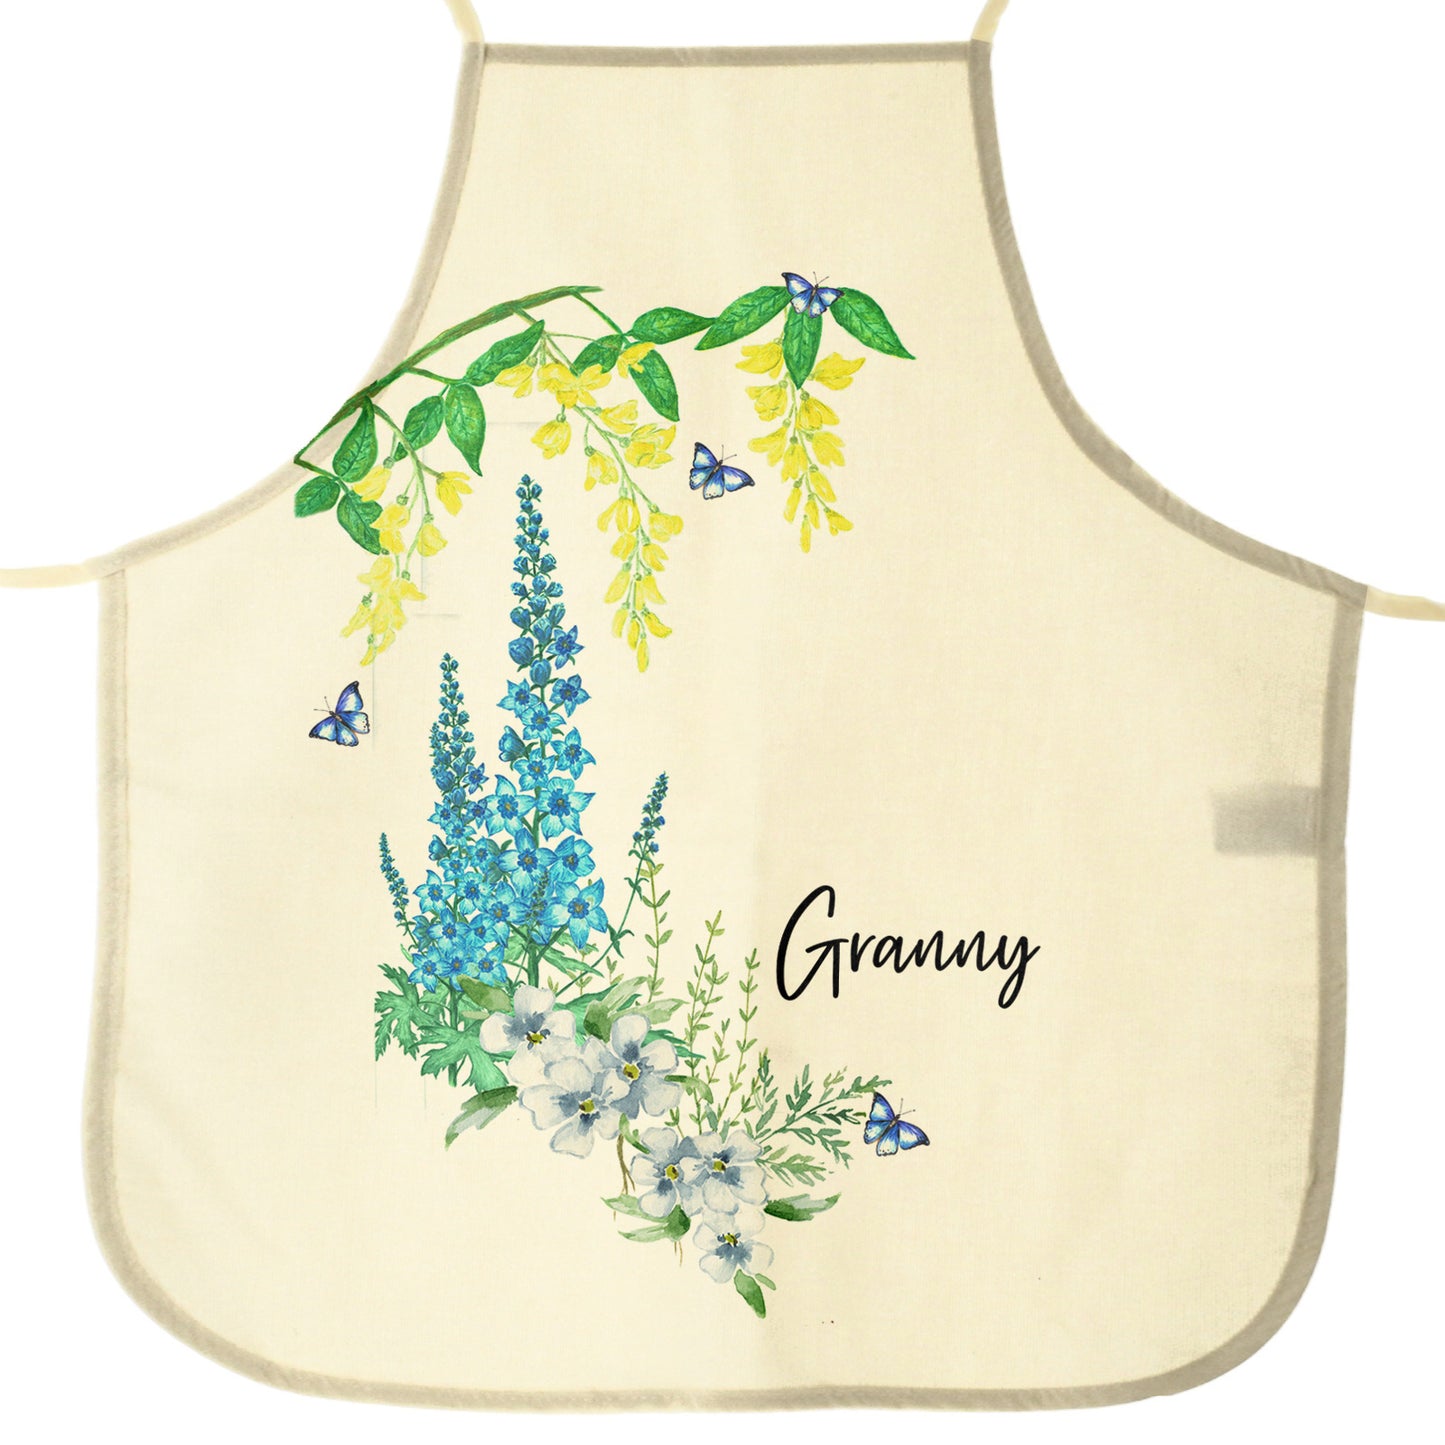 Personalised Apron with Stylish Text and Beautiful Garden Flowers Print